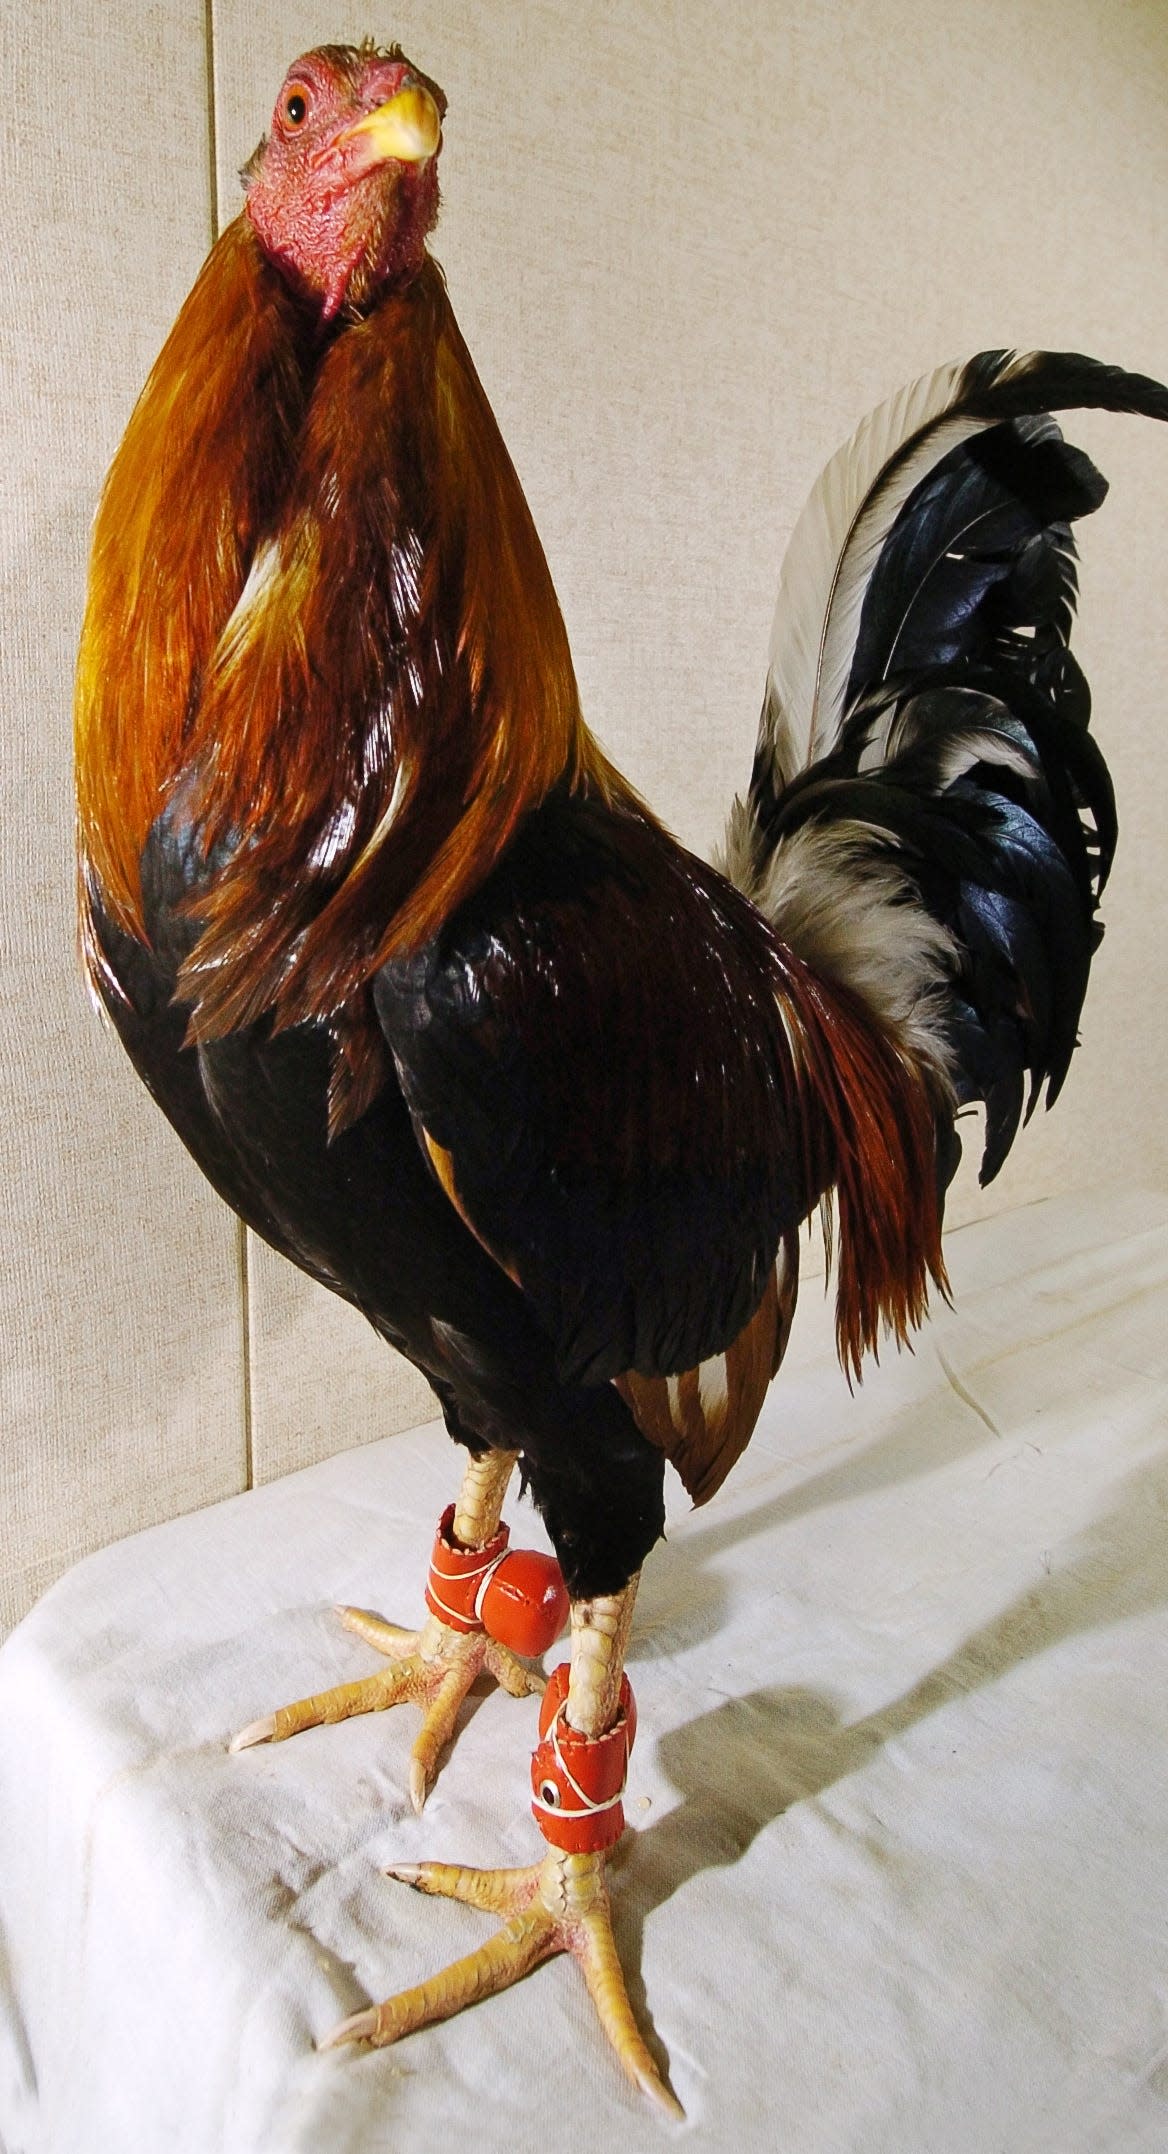 This file photo depicts a Yellow Leg Hatch gamecock wearing muffs, also called boxing gloves.